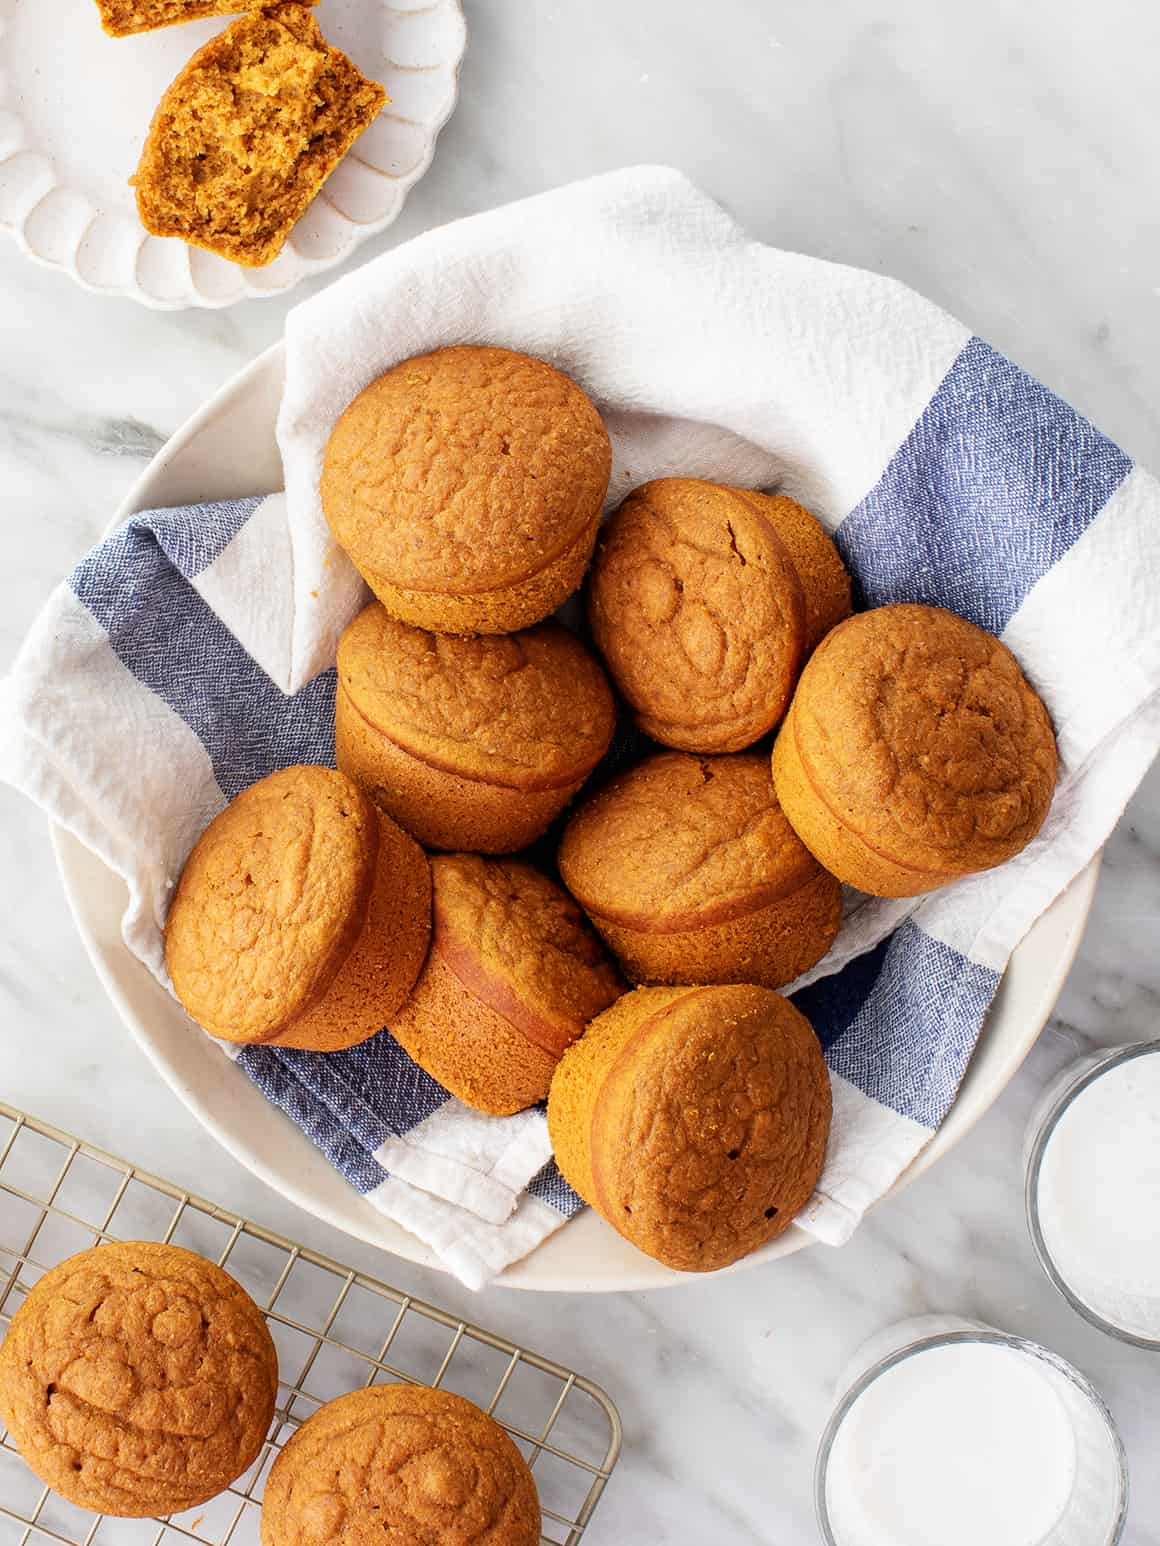 Pumpkin muffins in bowl lined with blue and white kitchen towel